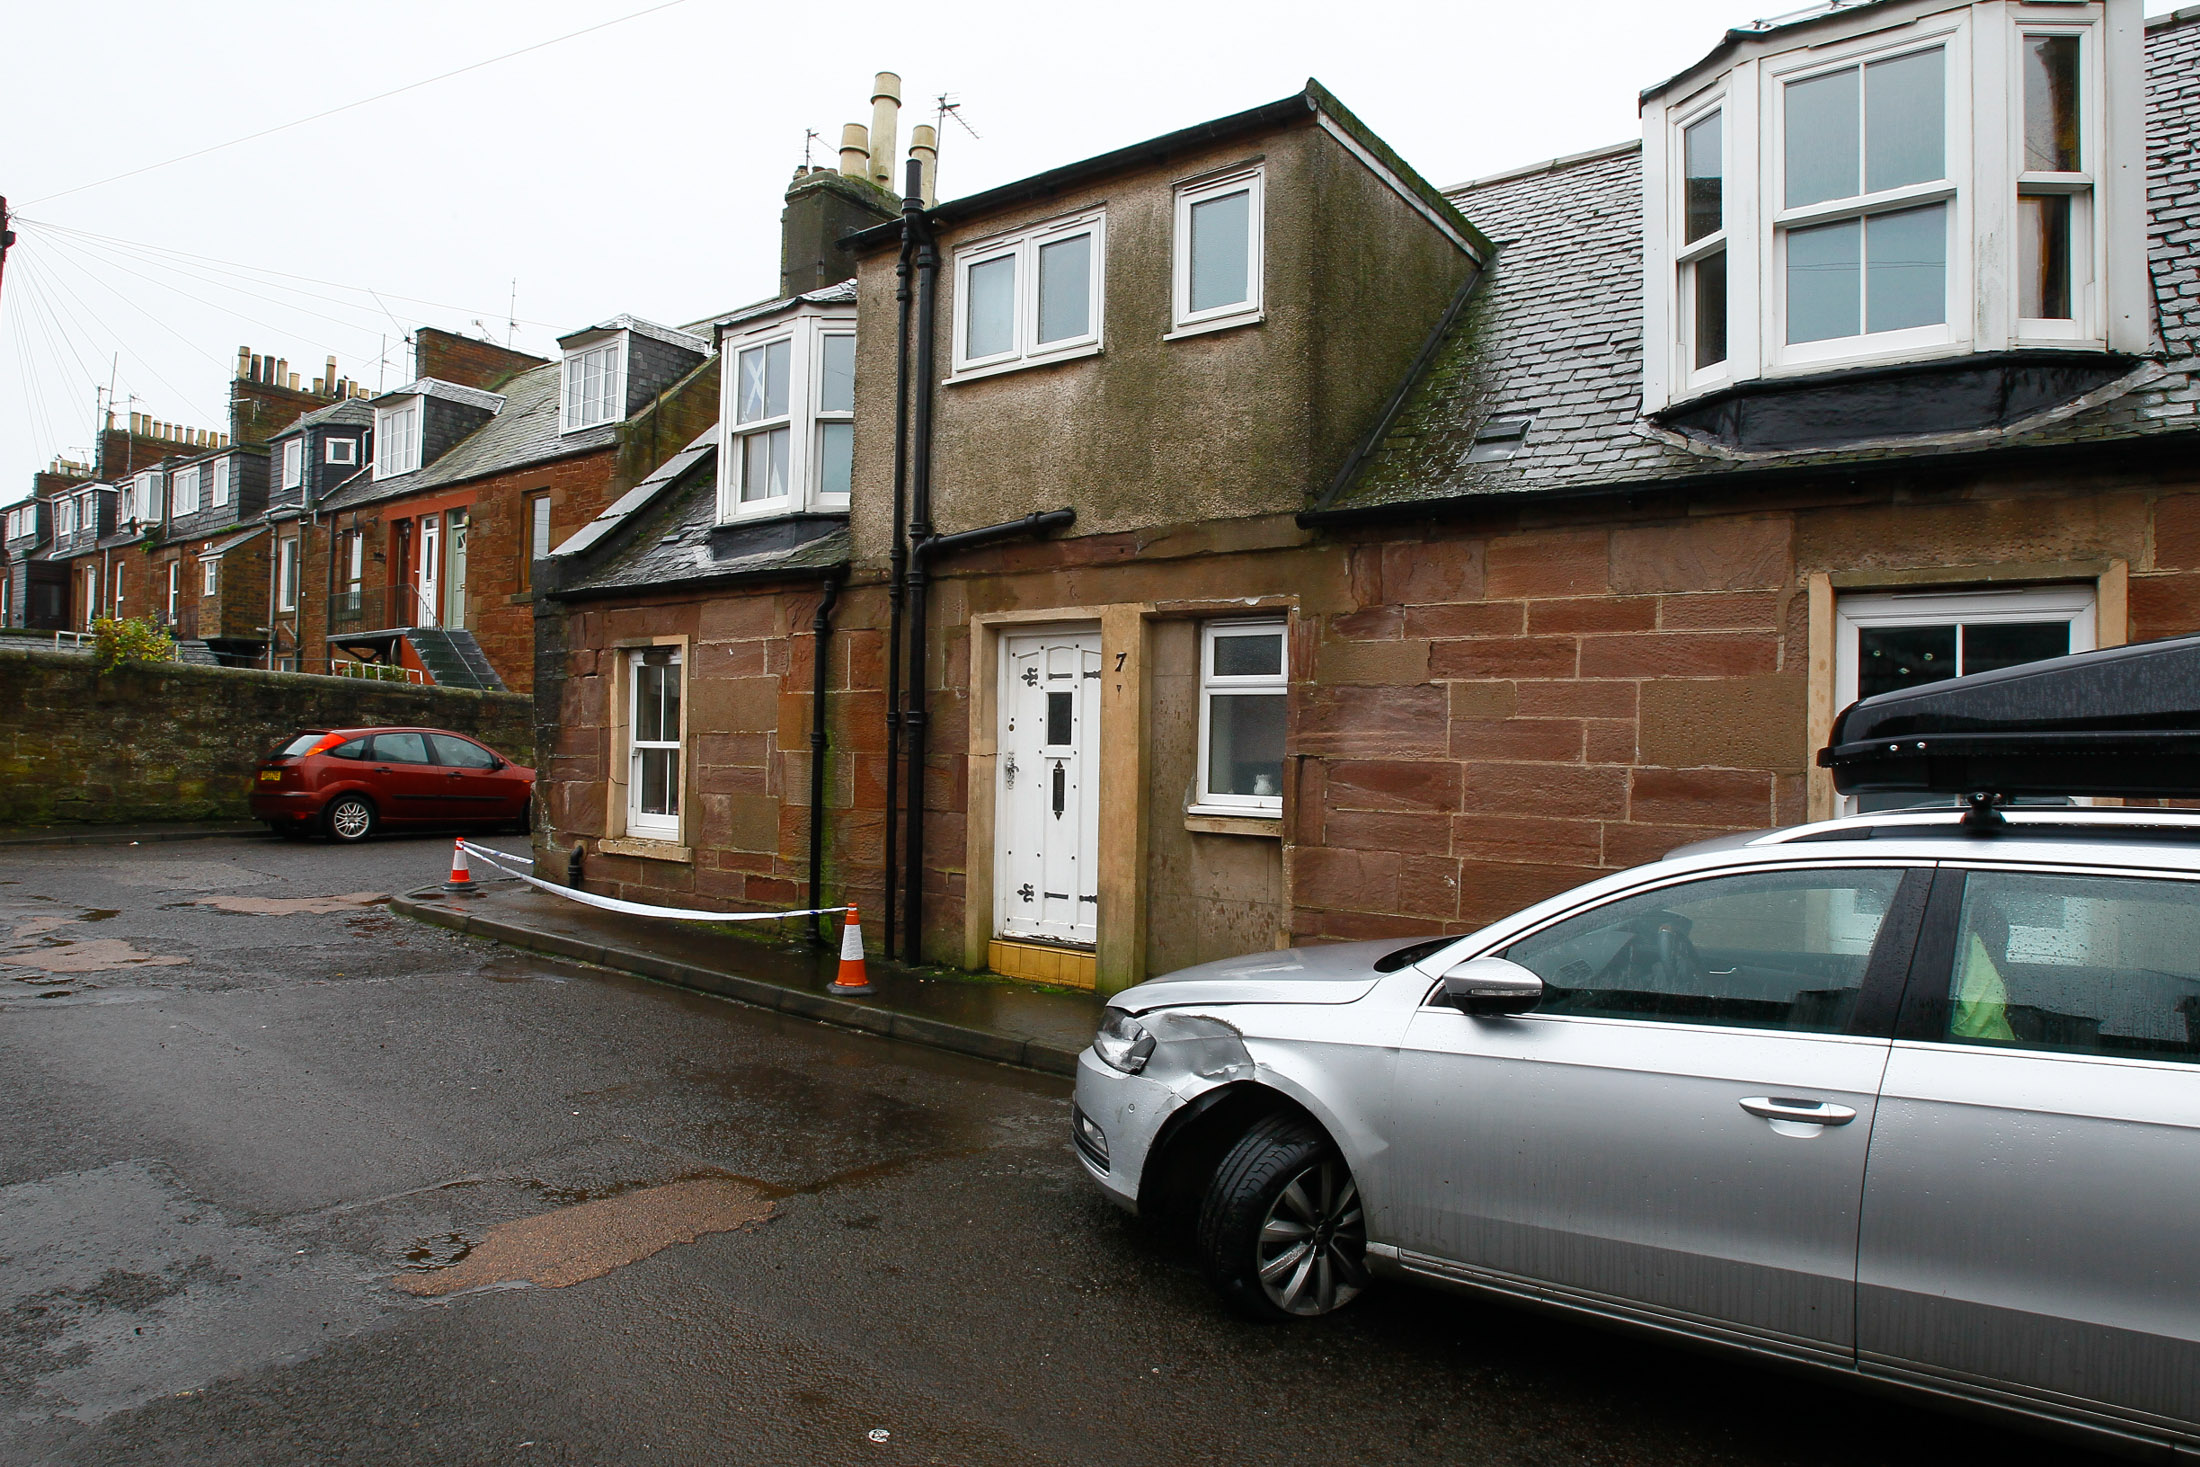 Jamieson Street into Garden Street, Arbroath, where cars and a house were hit by a lorry driver.